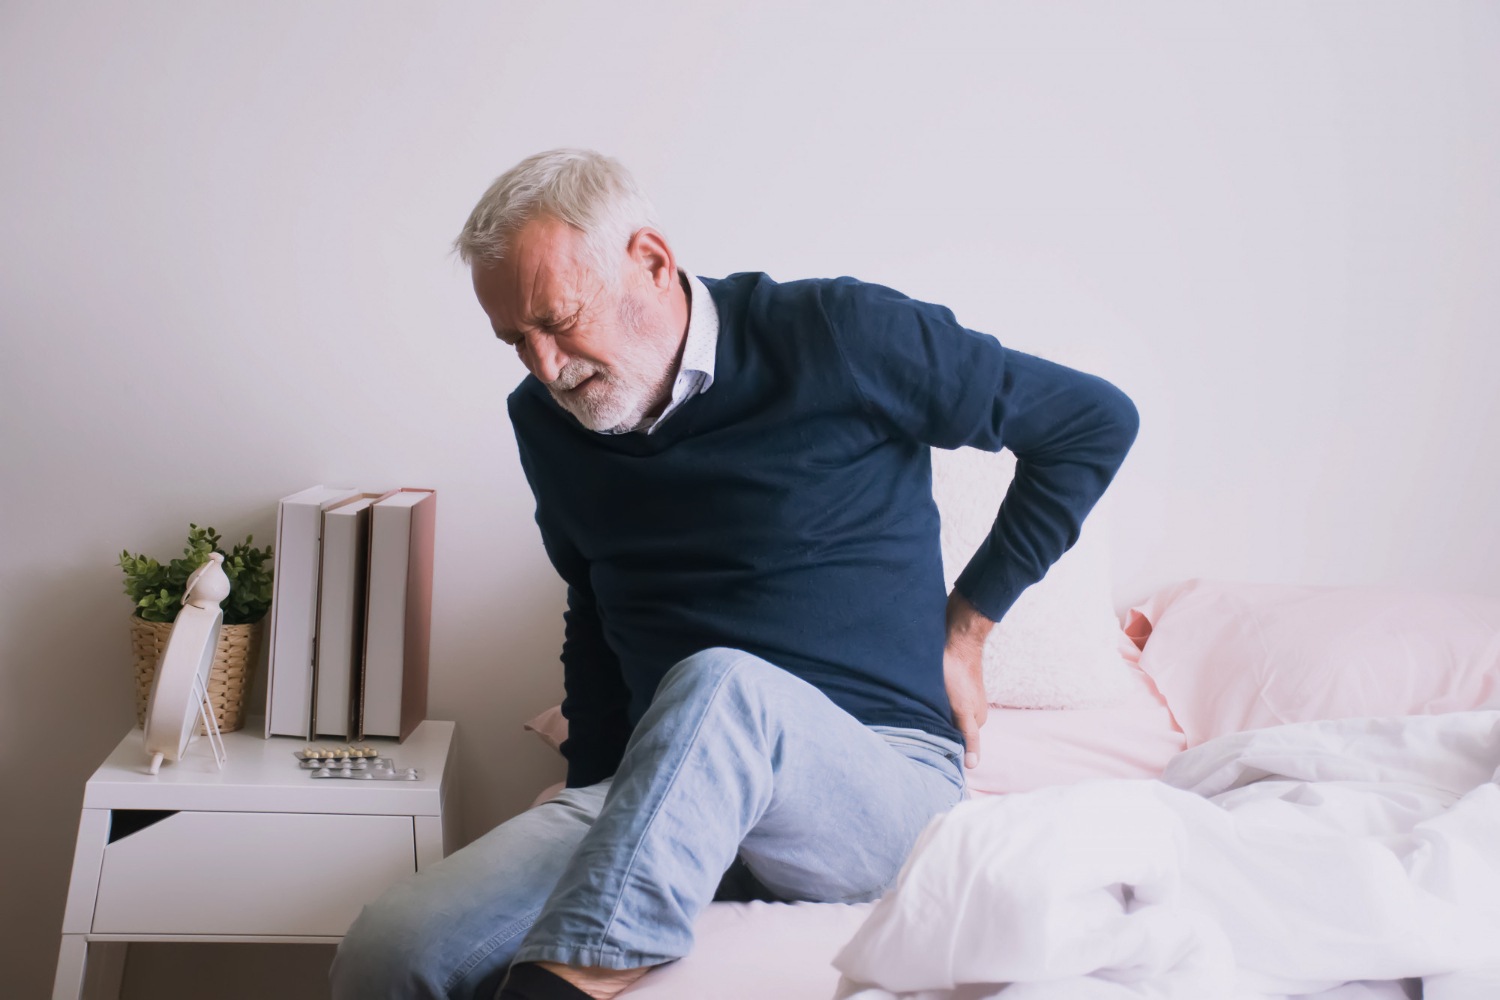 things to avoid with degenerative disc disease